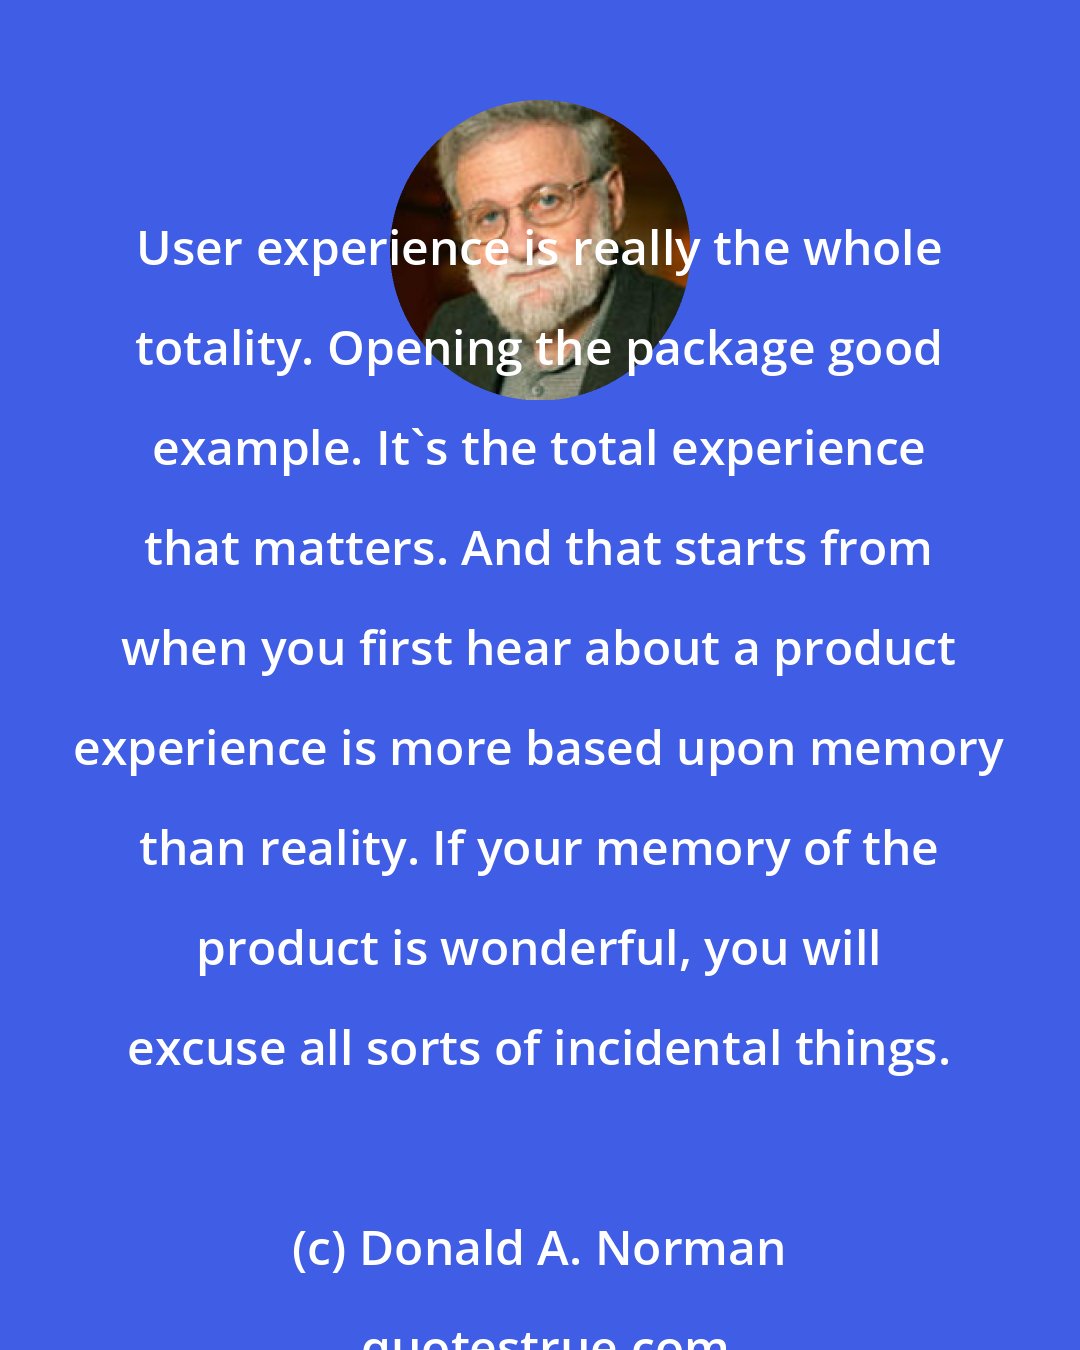 Donald A. Norman: User experience is really the whole totality. Opening the package good example. It's the total experience that matters. And that starts from when you first hear about a product experience is more based upon memory than reality. If your memory of the product is wonderful, you will excuse all sorts of incidental things.